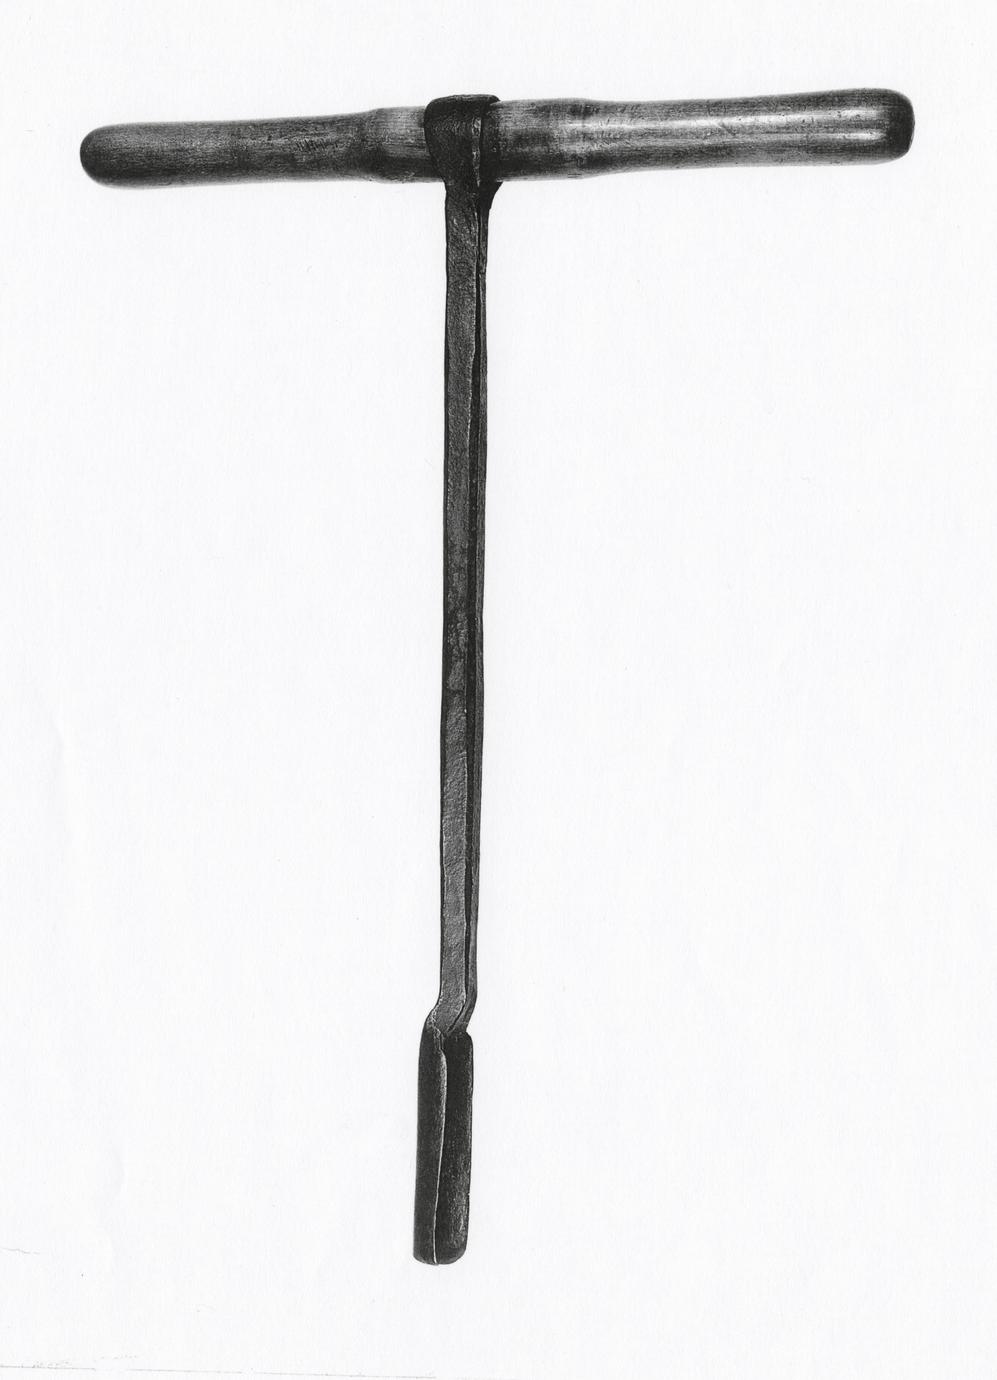 Black and white image of an auger